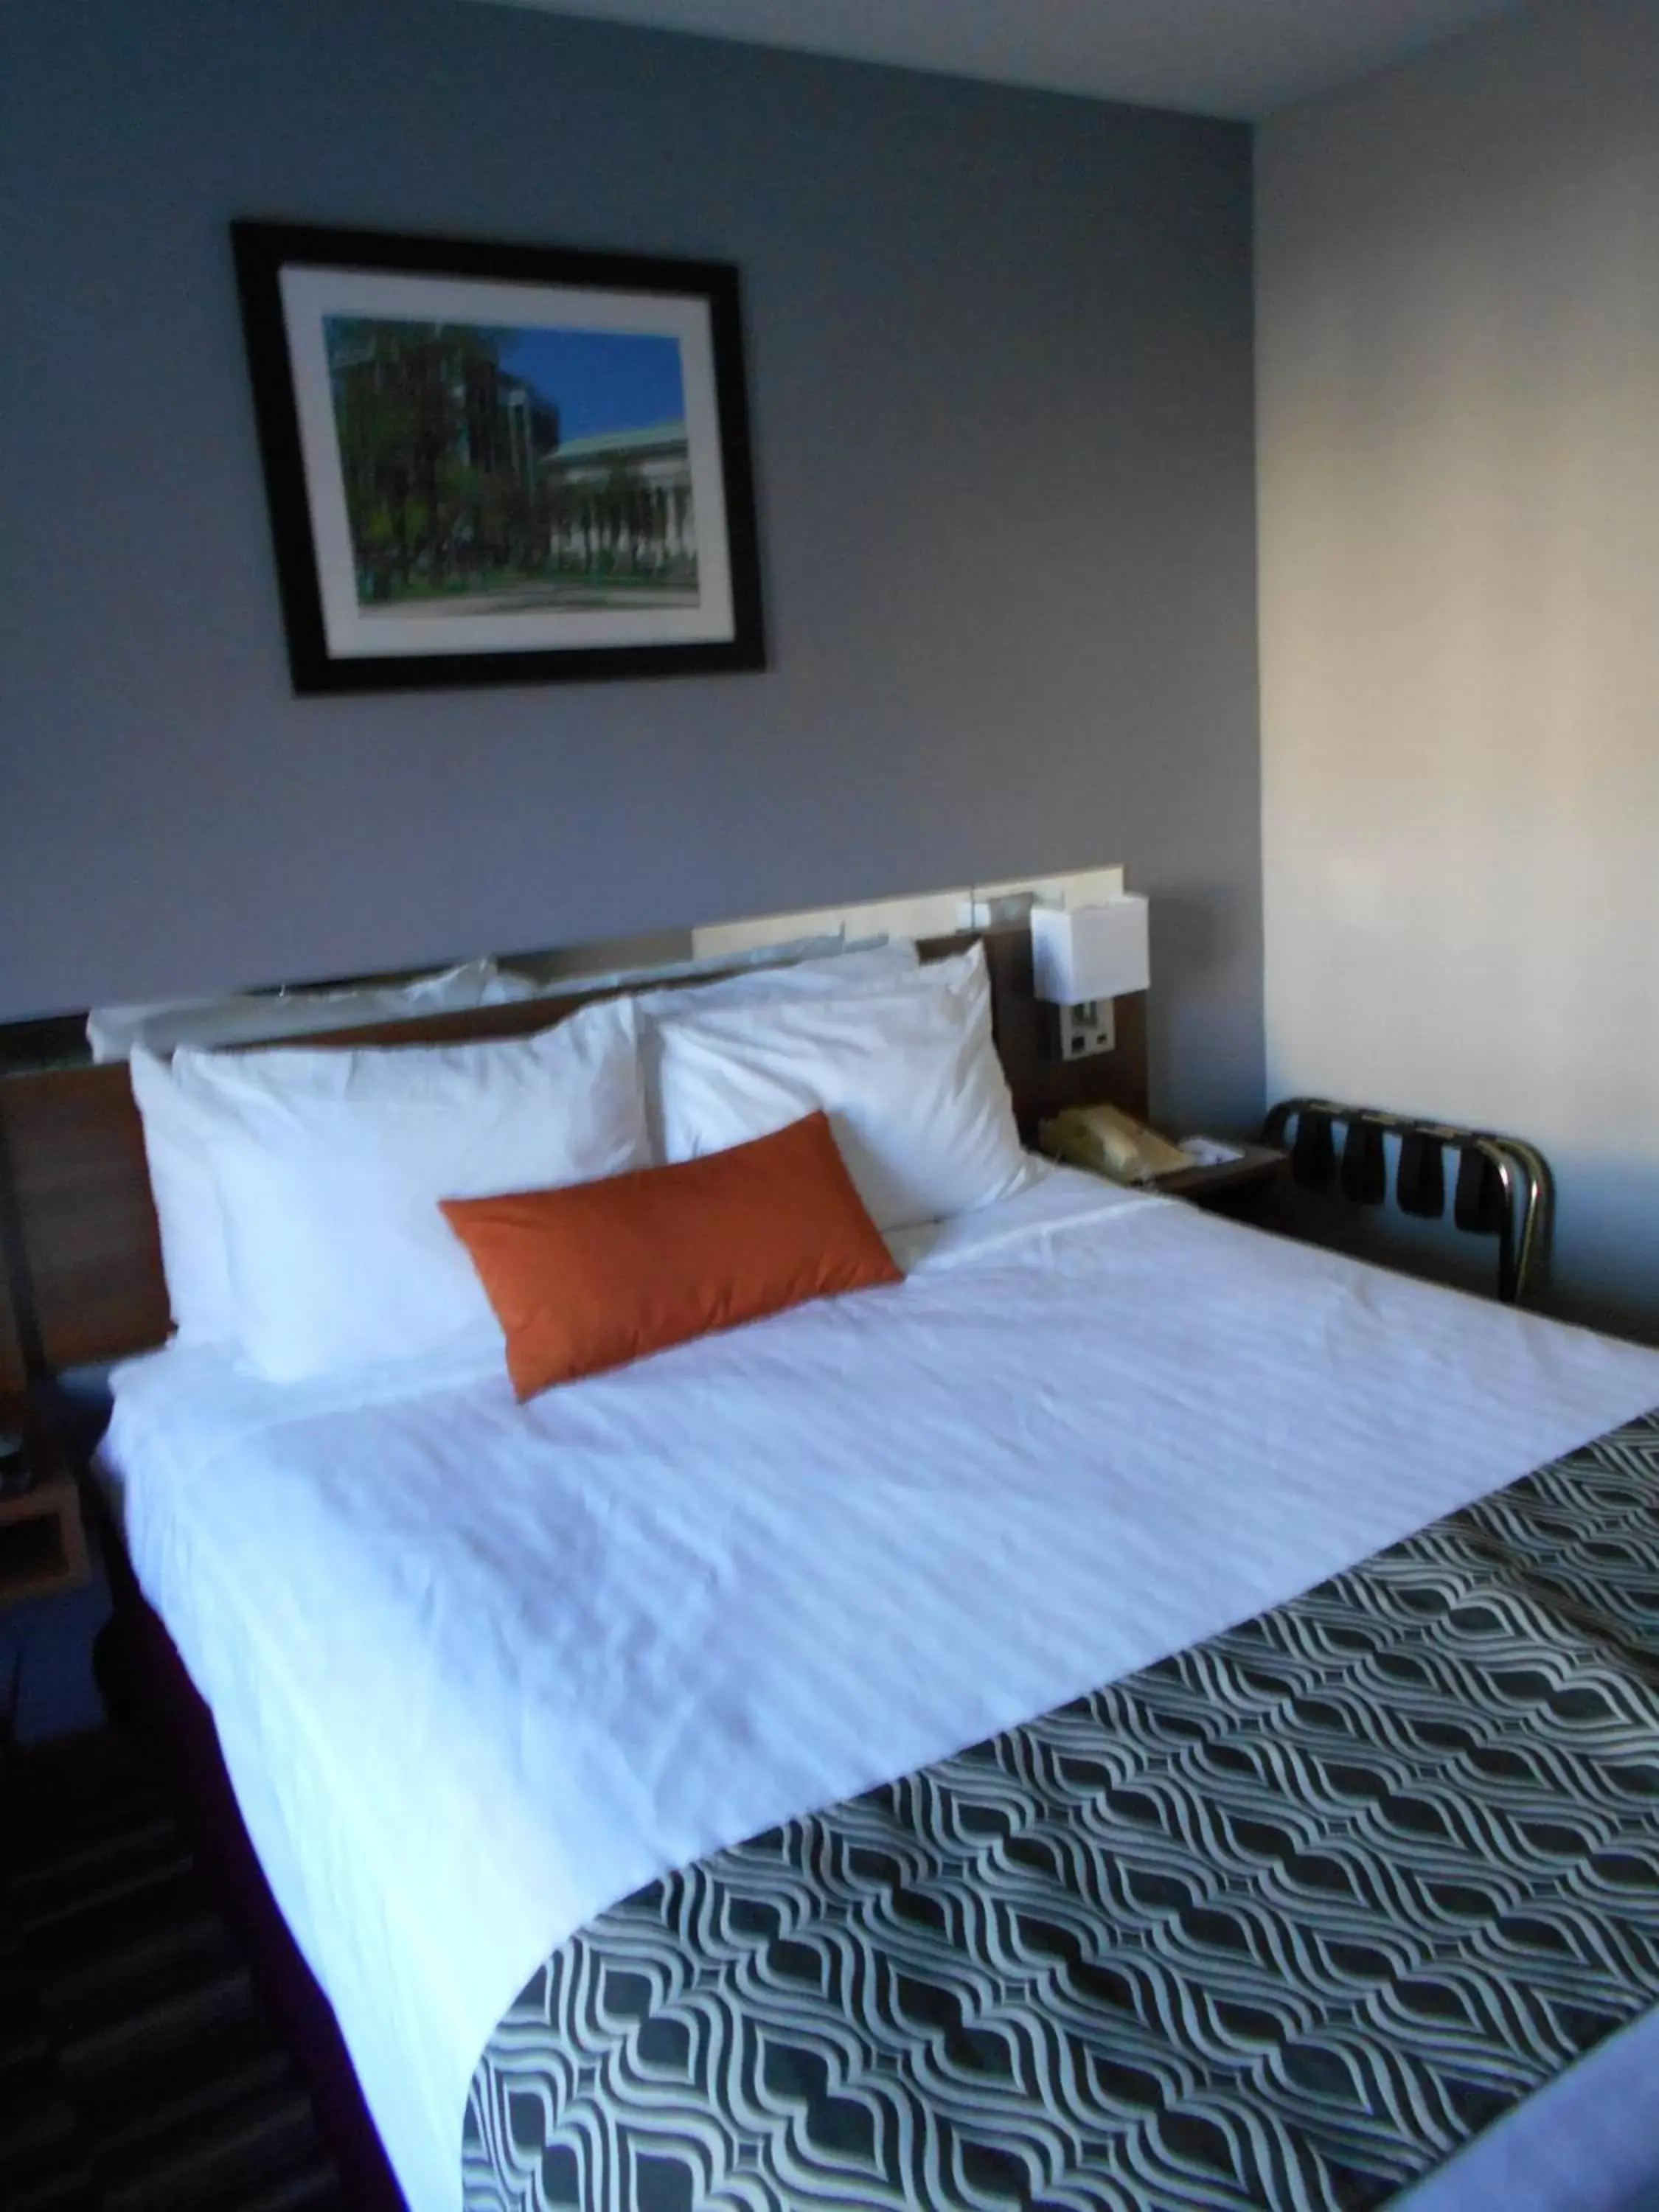 Decorative detail, Bed in Microtel Inn by Wyndham - Albany Airport